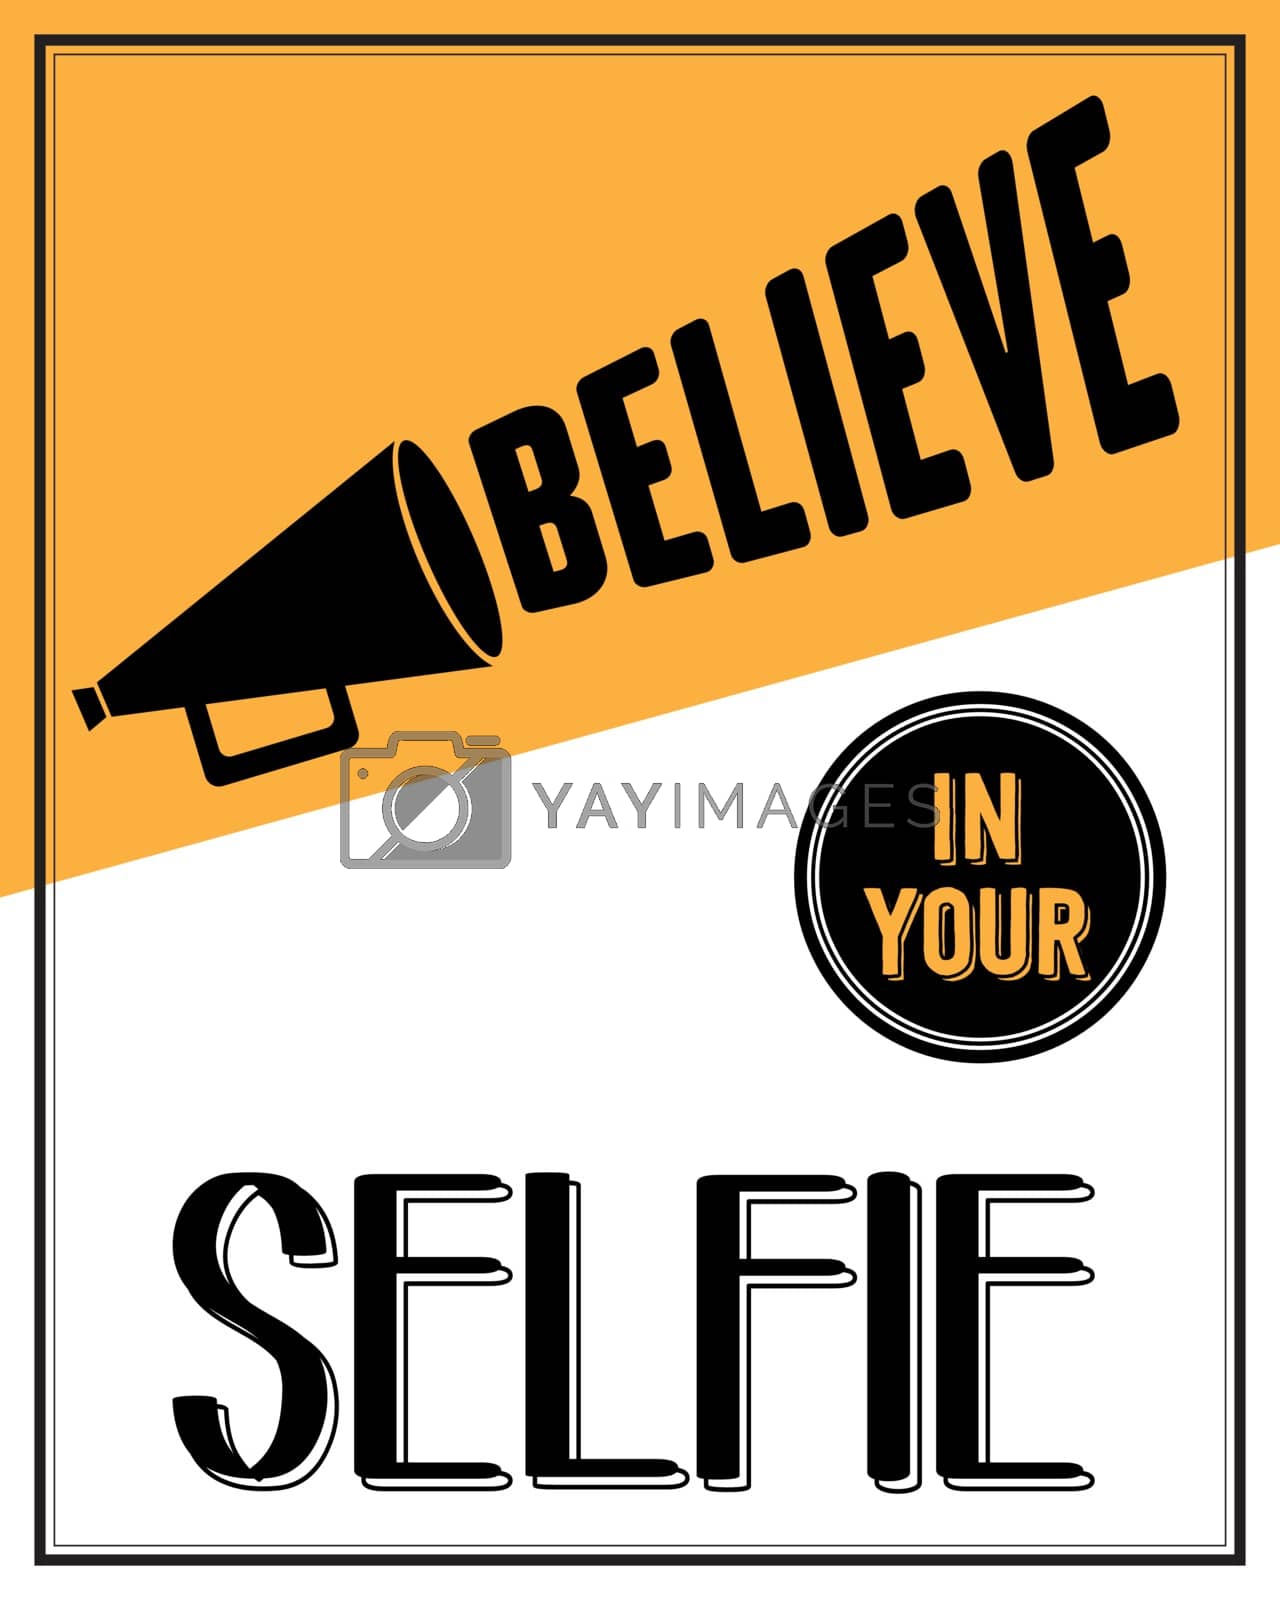 Royalty free image of Inspirational quote. "Believe in your selfie" by balasoiu